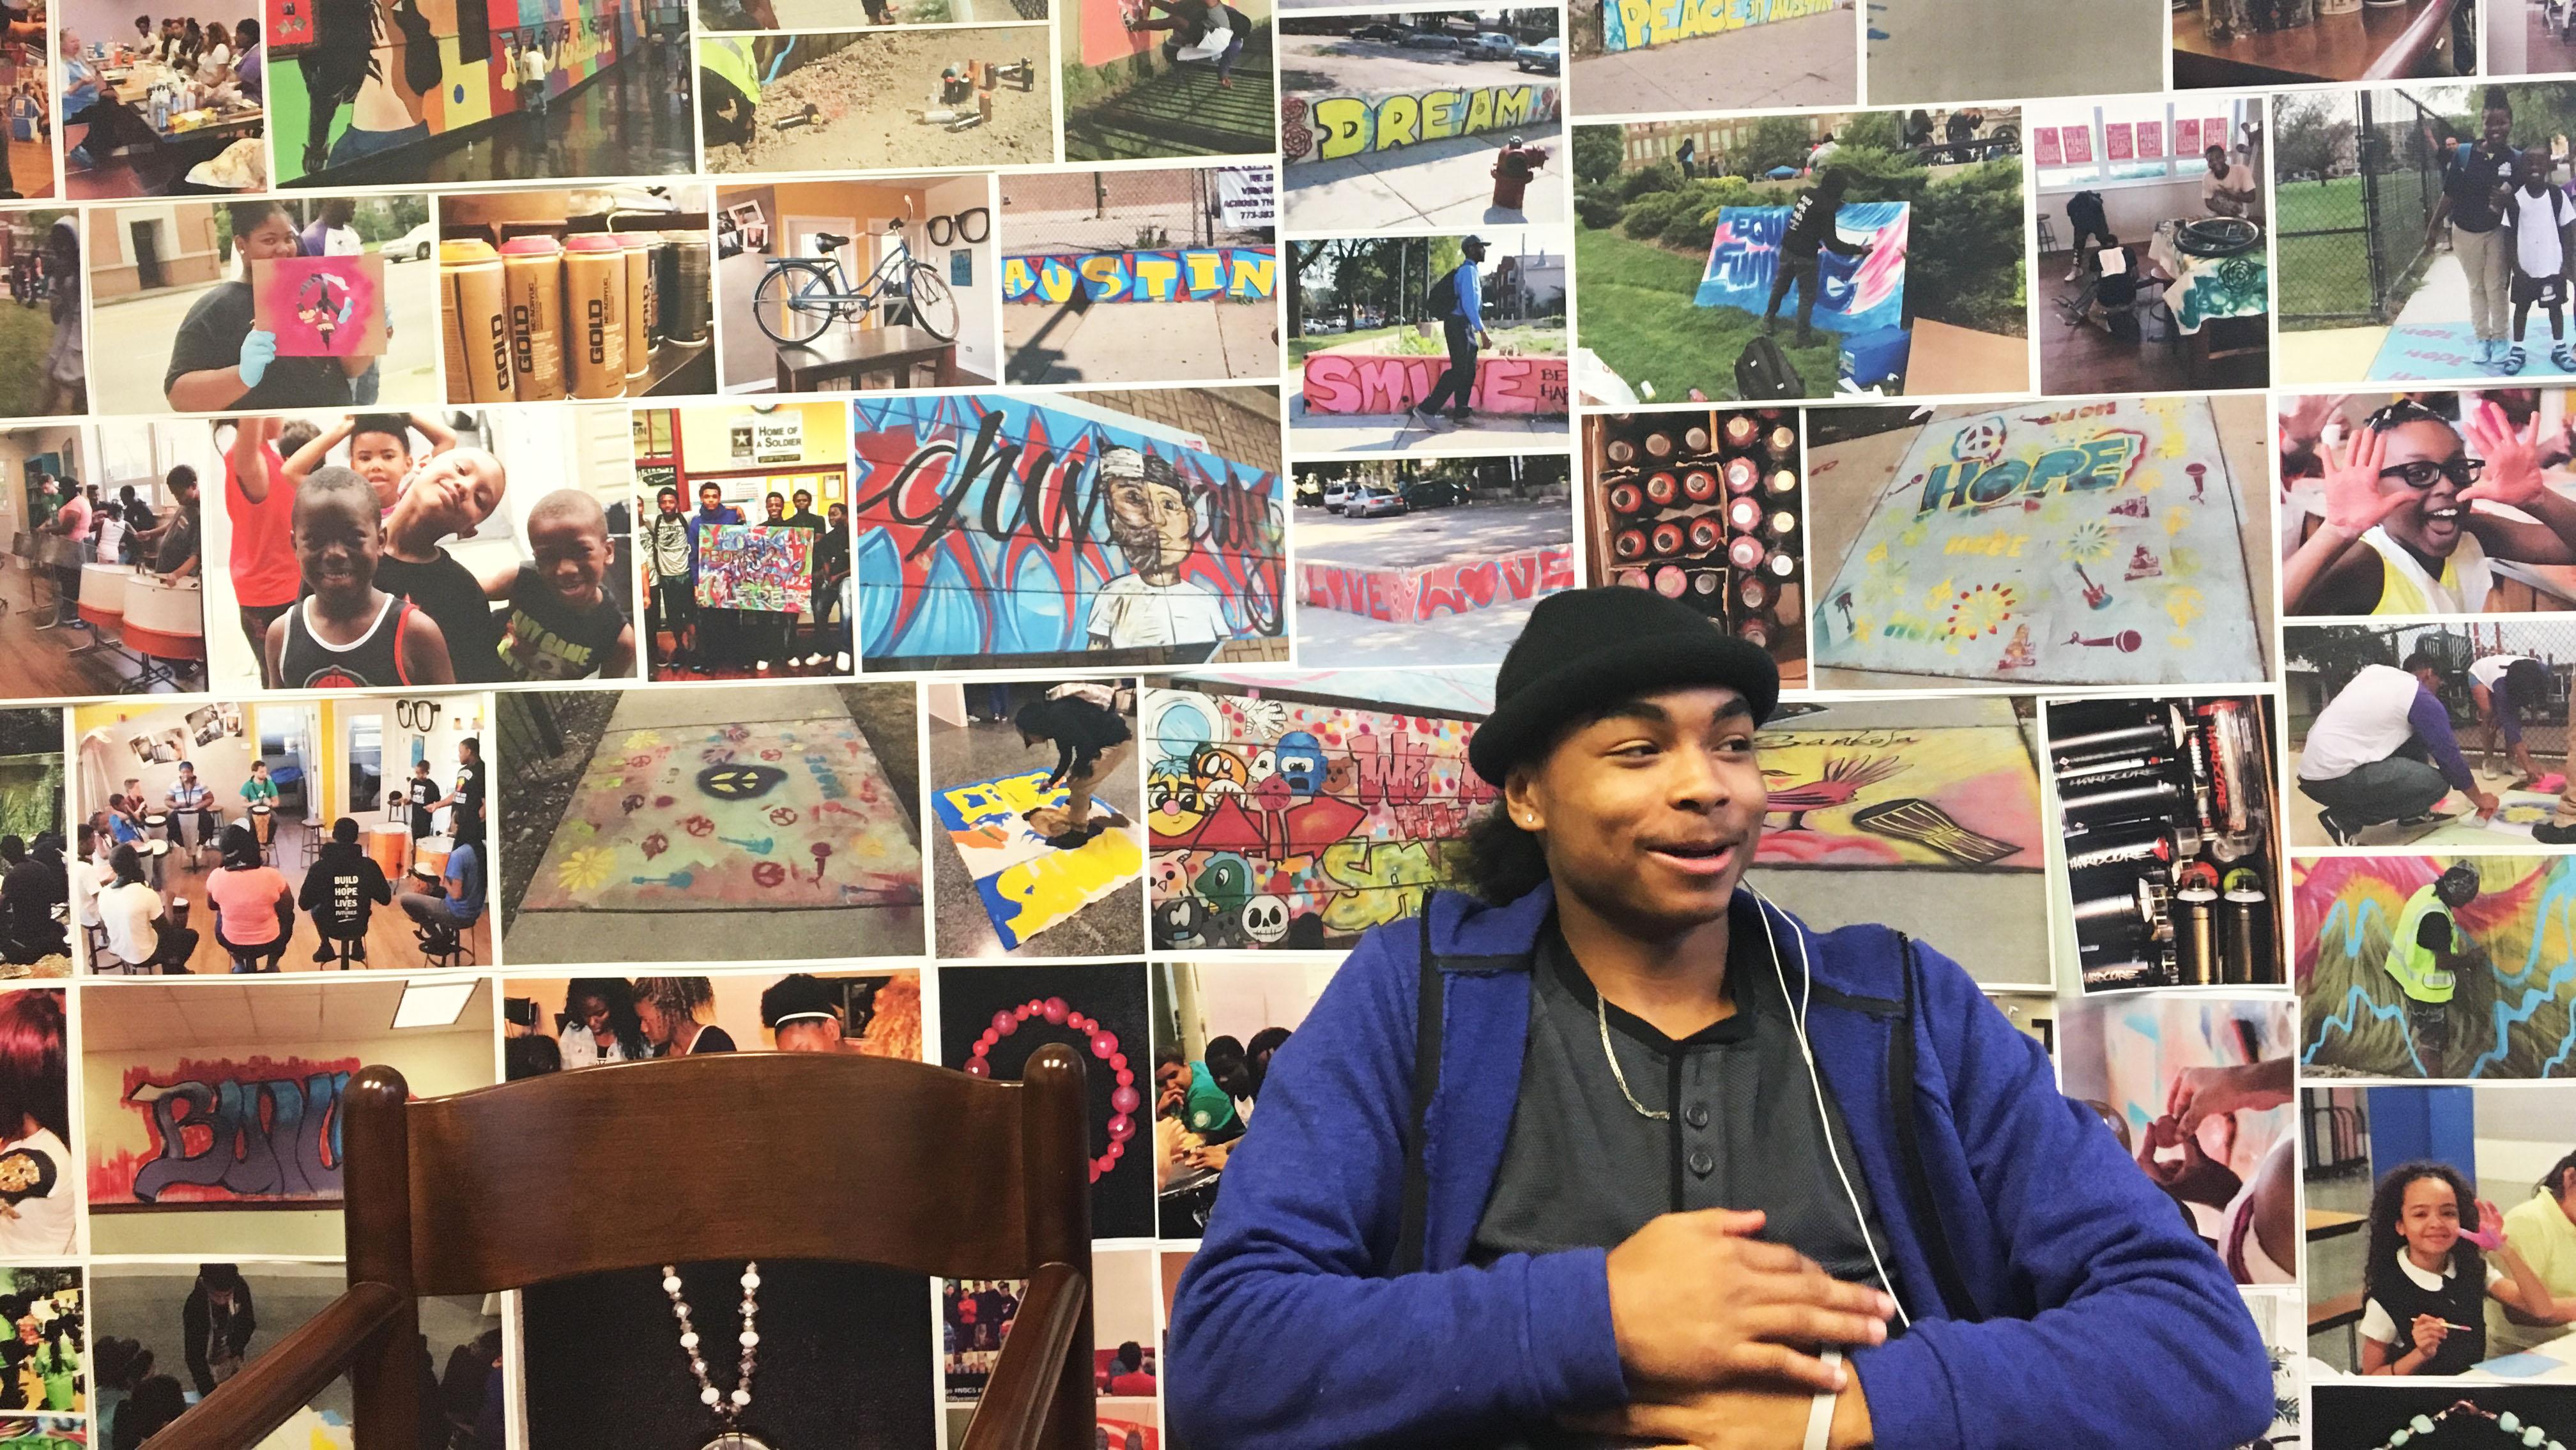 Latee Smith was 12 years old when he joined a gang. Now 16, he’s focusing on trying to “make something positive” out of his life. (Maya Miller / Chicago Tonight)